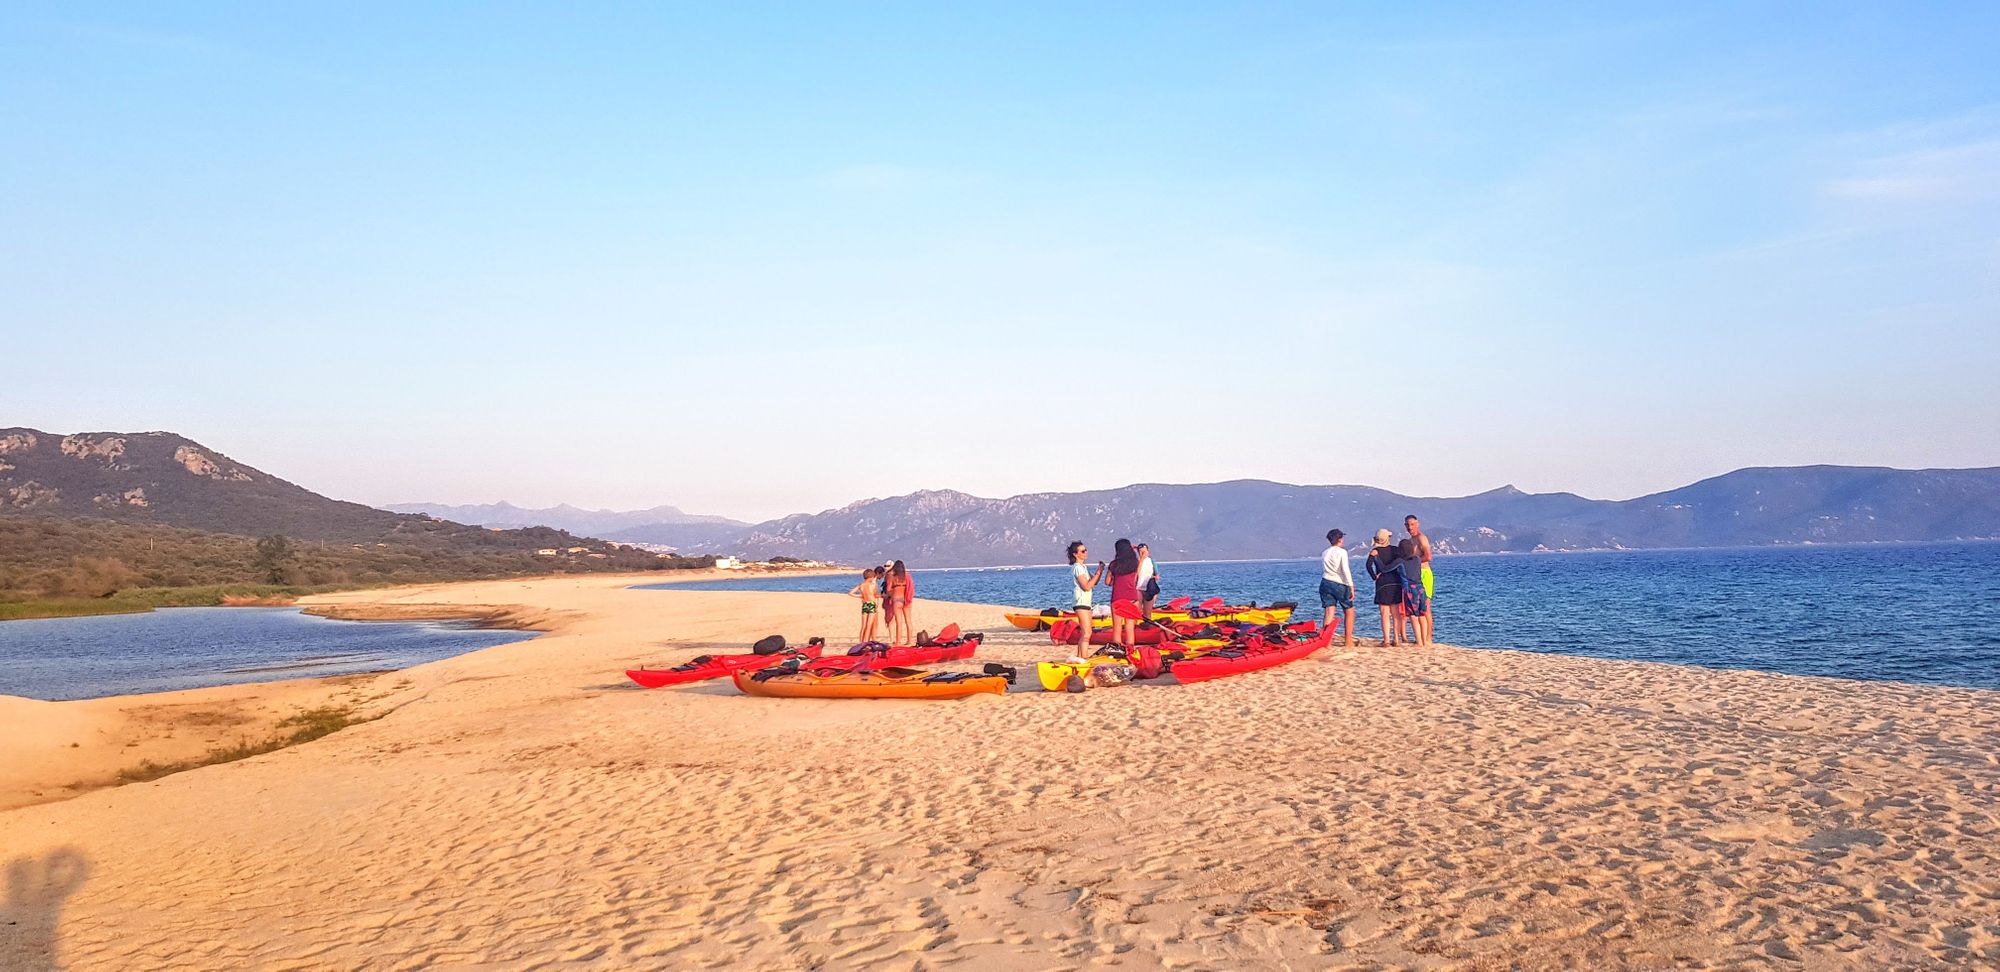 Kayakers on a Corsican beach.